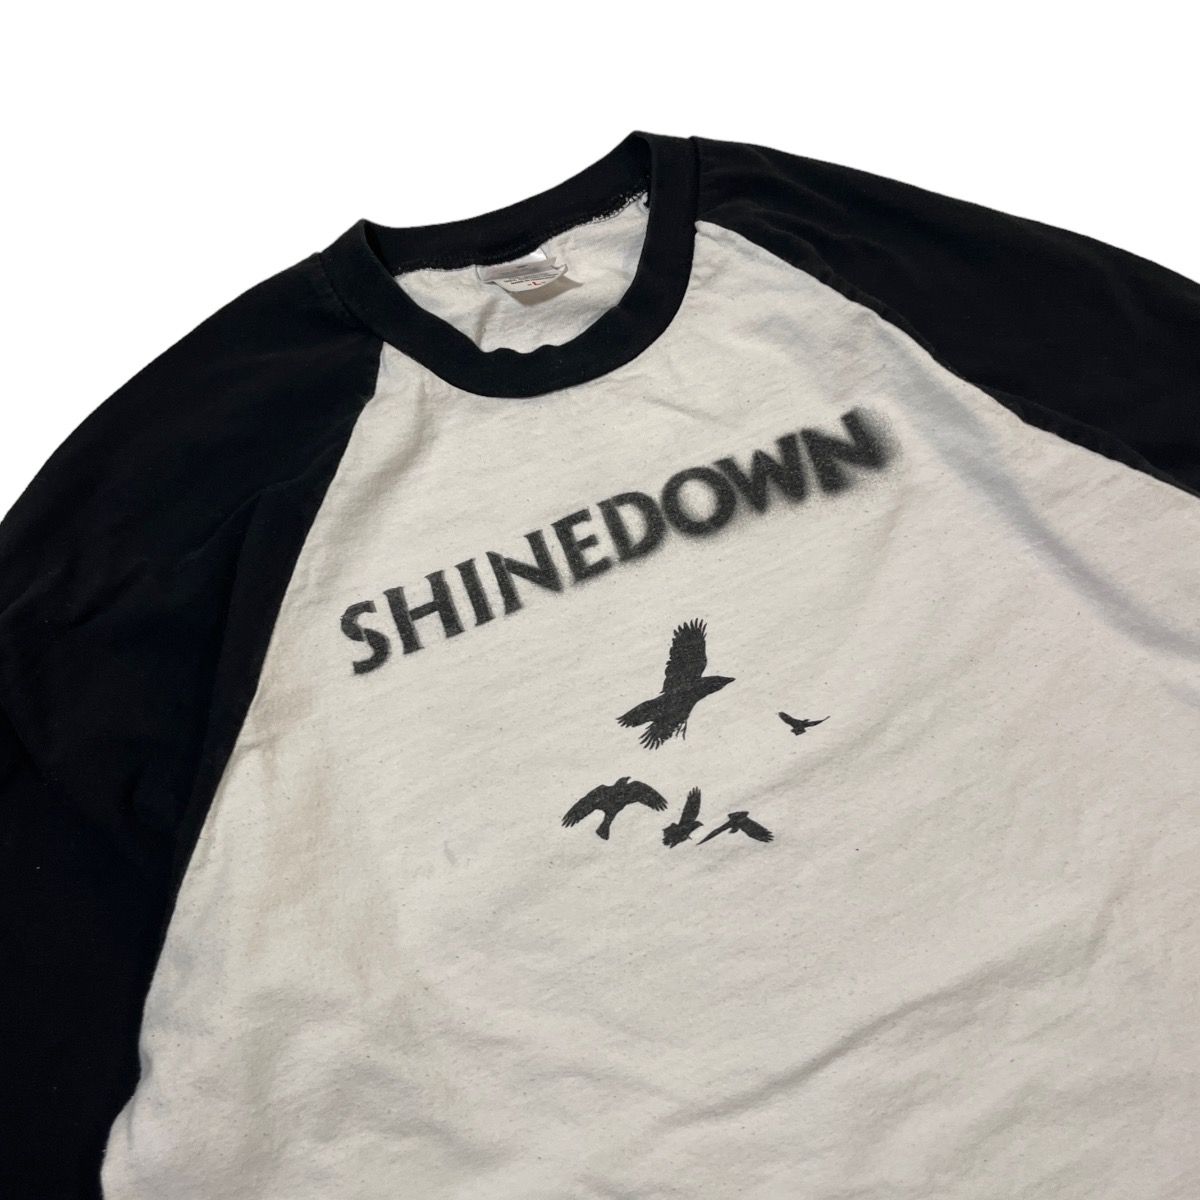 Vintage 2008 Shinedown Sound of Madness Tee Size US L / EU 52-54 / 3 - 2 Preview